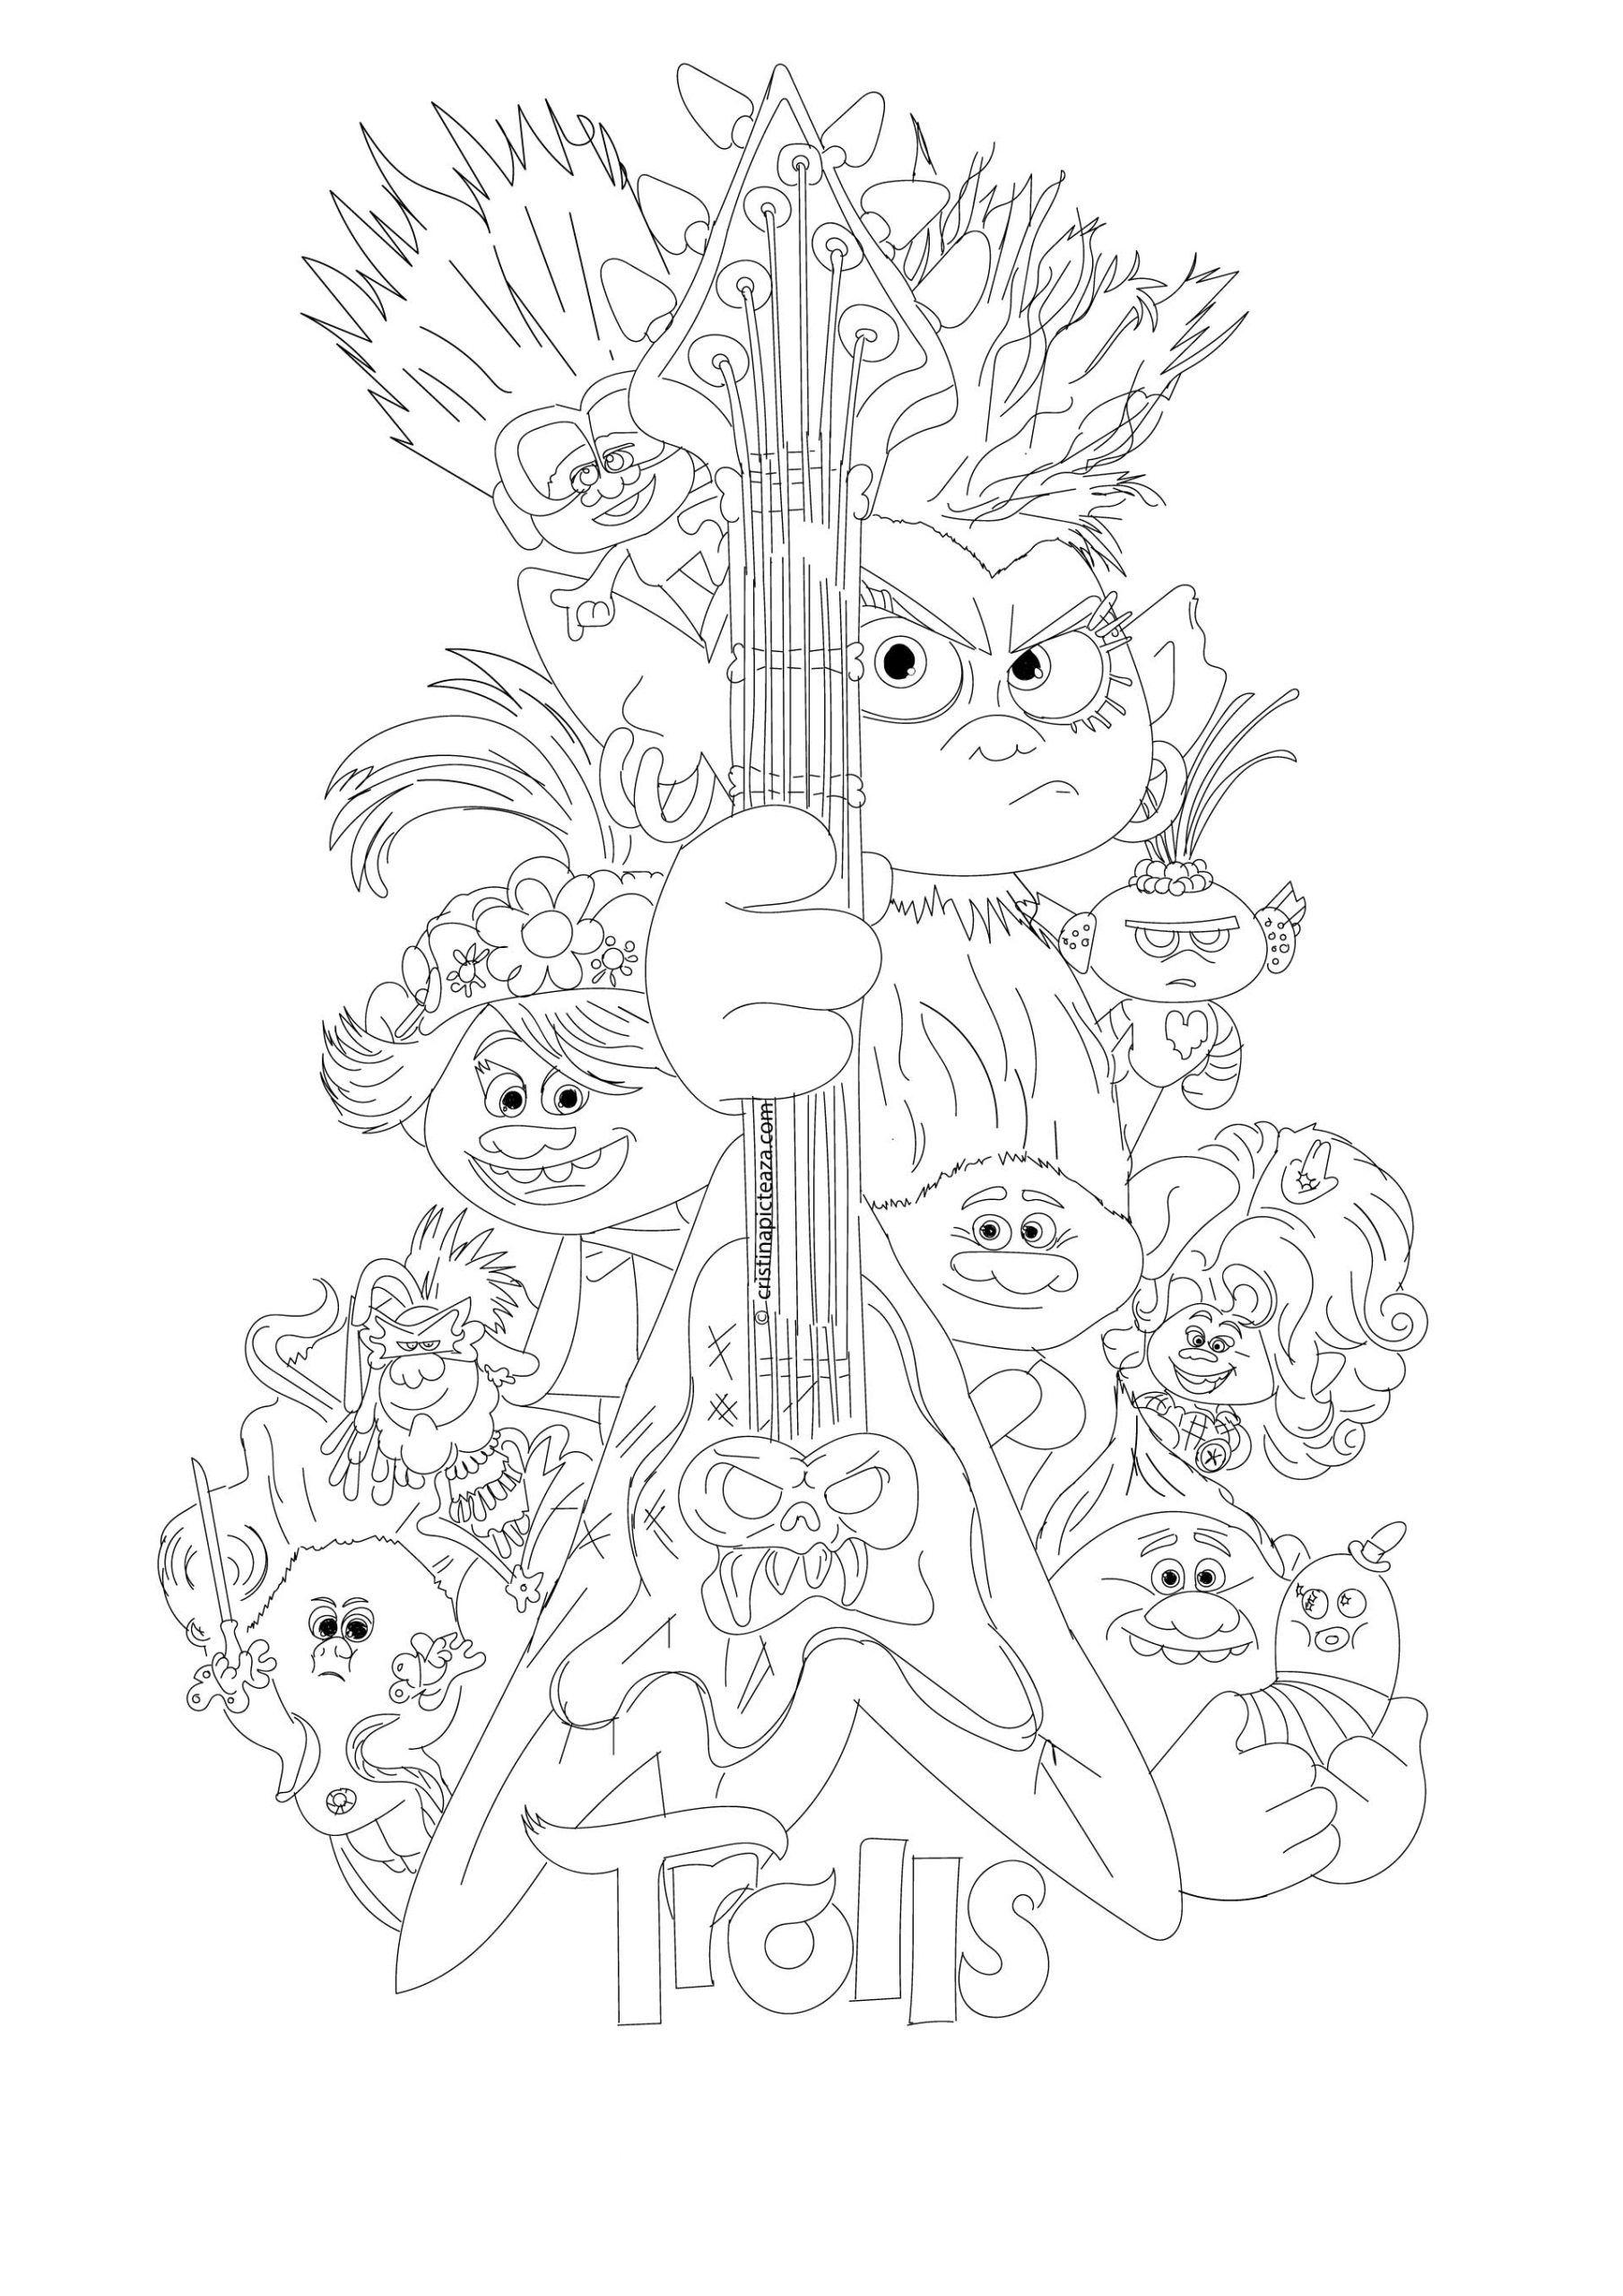 Trolls coloring pages world tour â cristina is painting